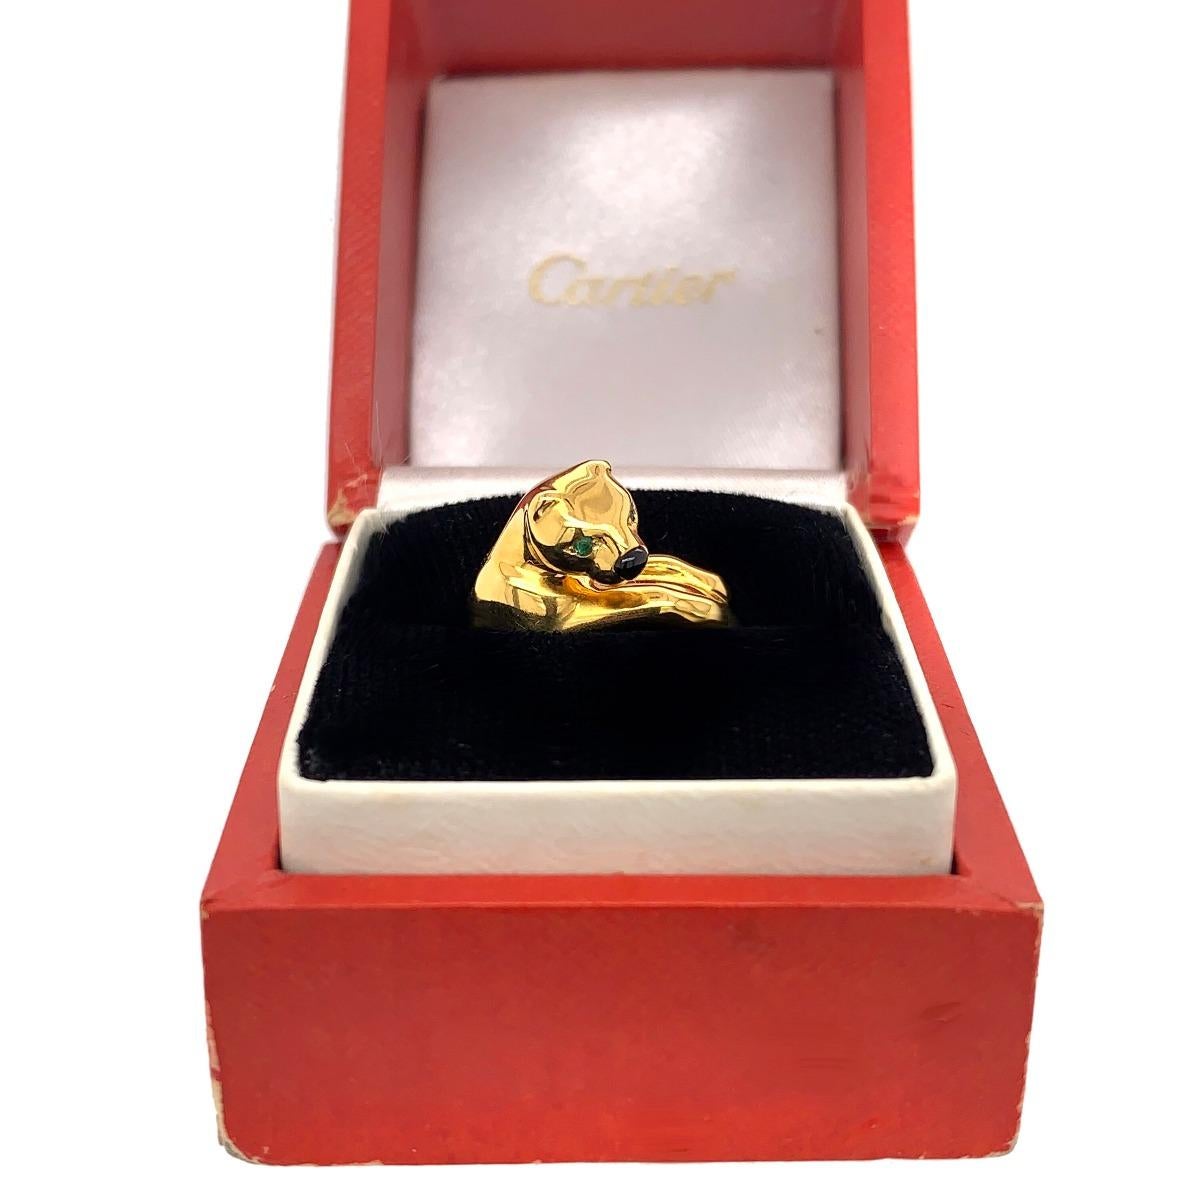 Brand: Cartier 
Metal: 18k Yellow Gold
Condition: Excellent
Ring Size: 7.5
Total Item Weight:  11.9 g
Comes With Original Box.

SKU#R-01574